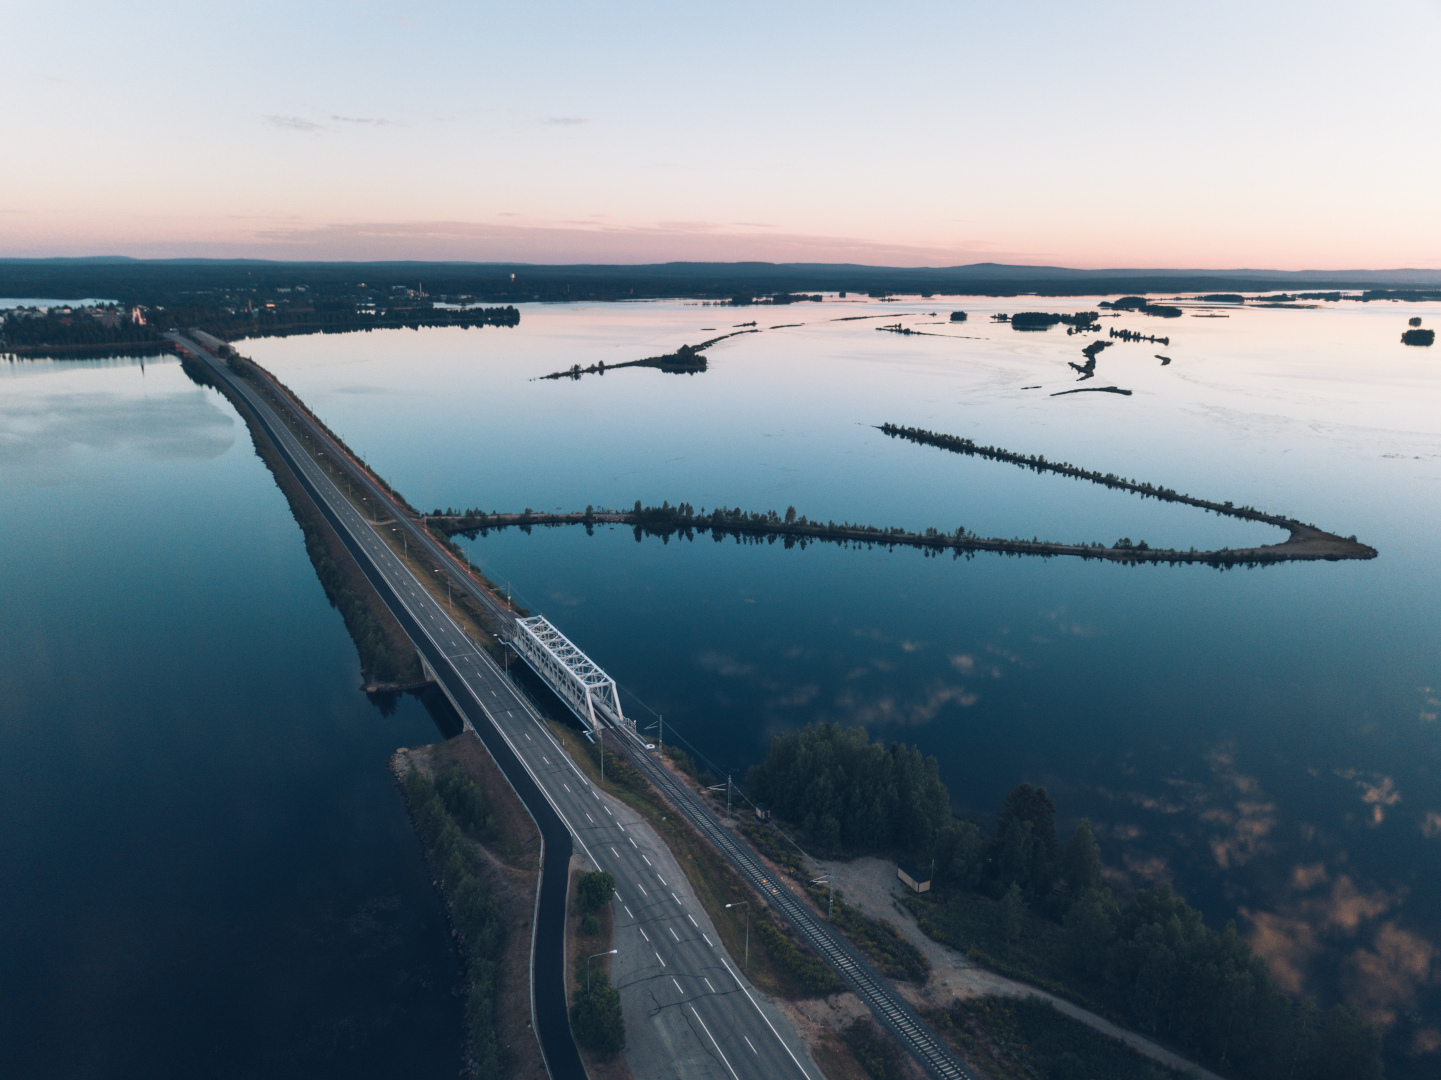 The bridge to Kemijärvi, your invitation to find your workplace in Lapland